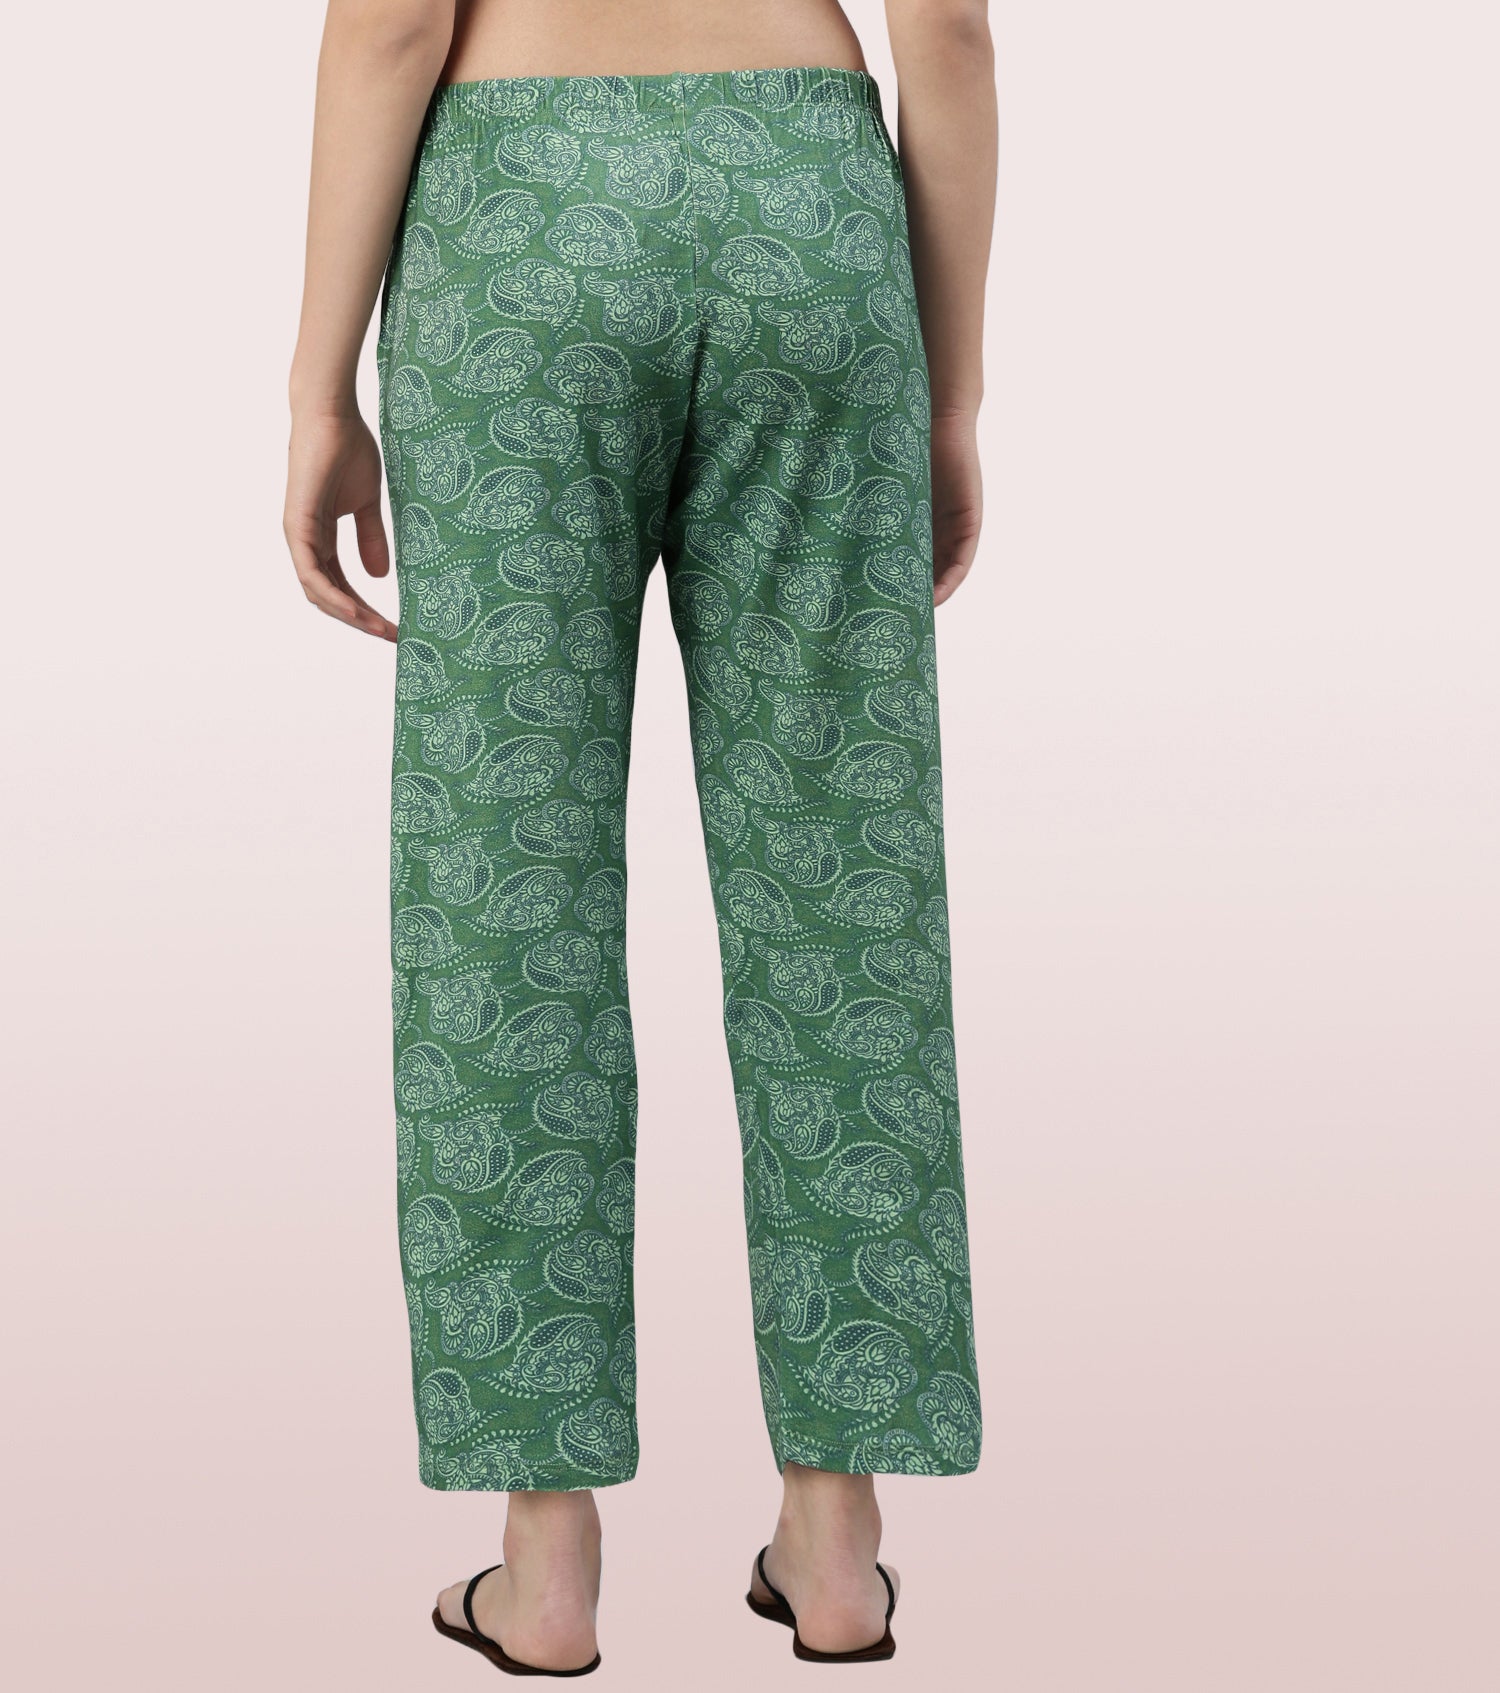 Essentials – E4A4
BASIC HOME PANT | VISCOSE SPANDES PRINTED PULL-ON PANT
RELAXED FIT | MID RISE | REGULAR LENGTH